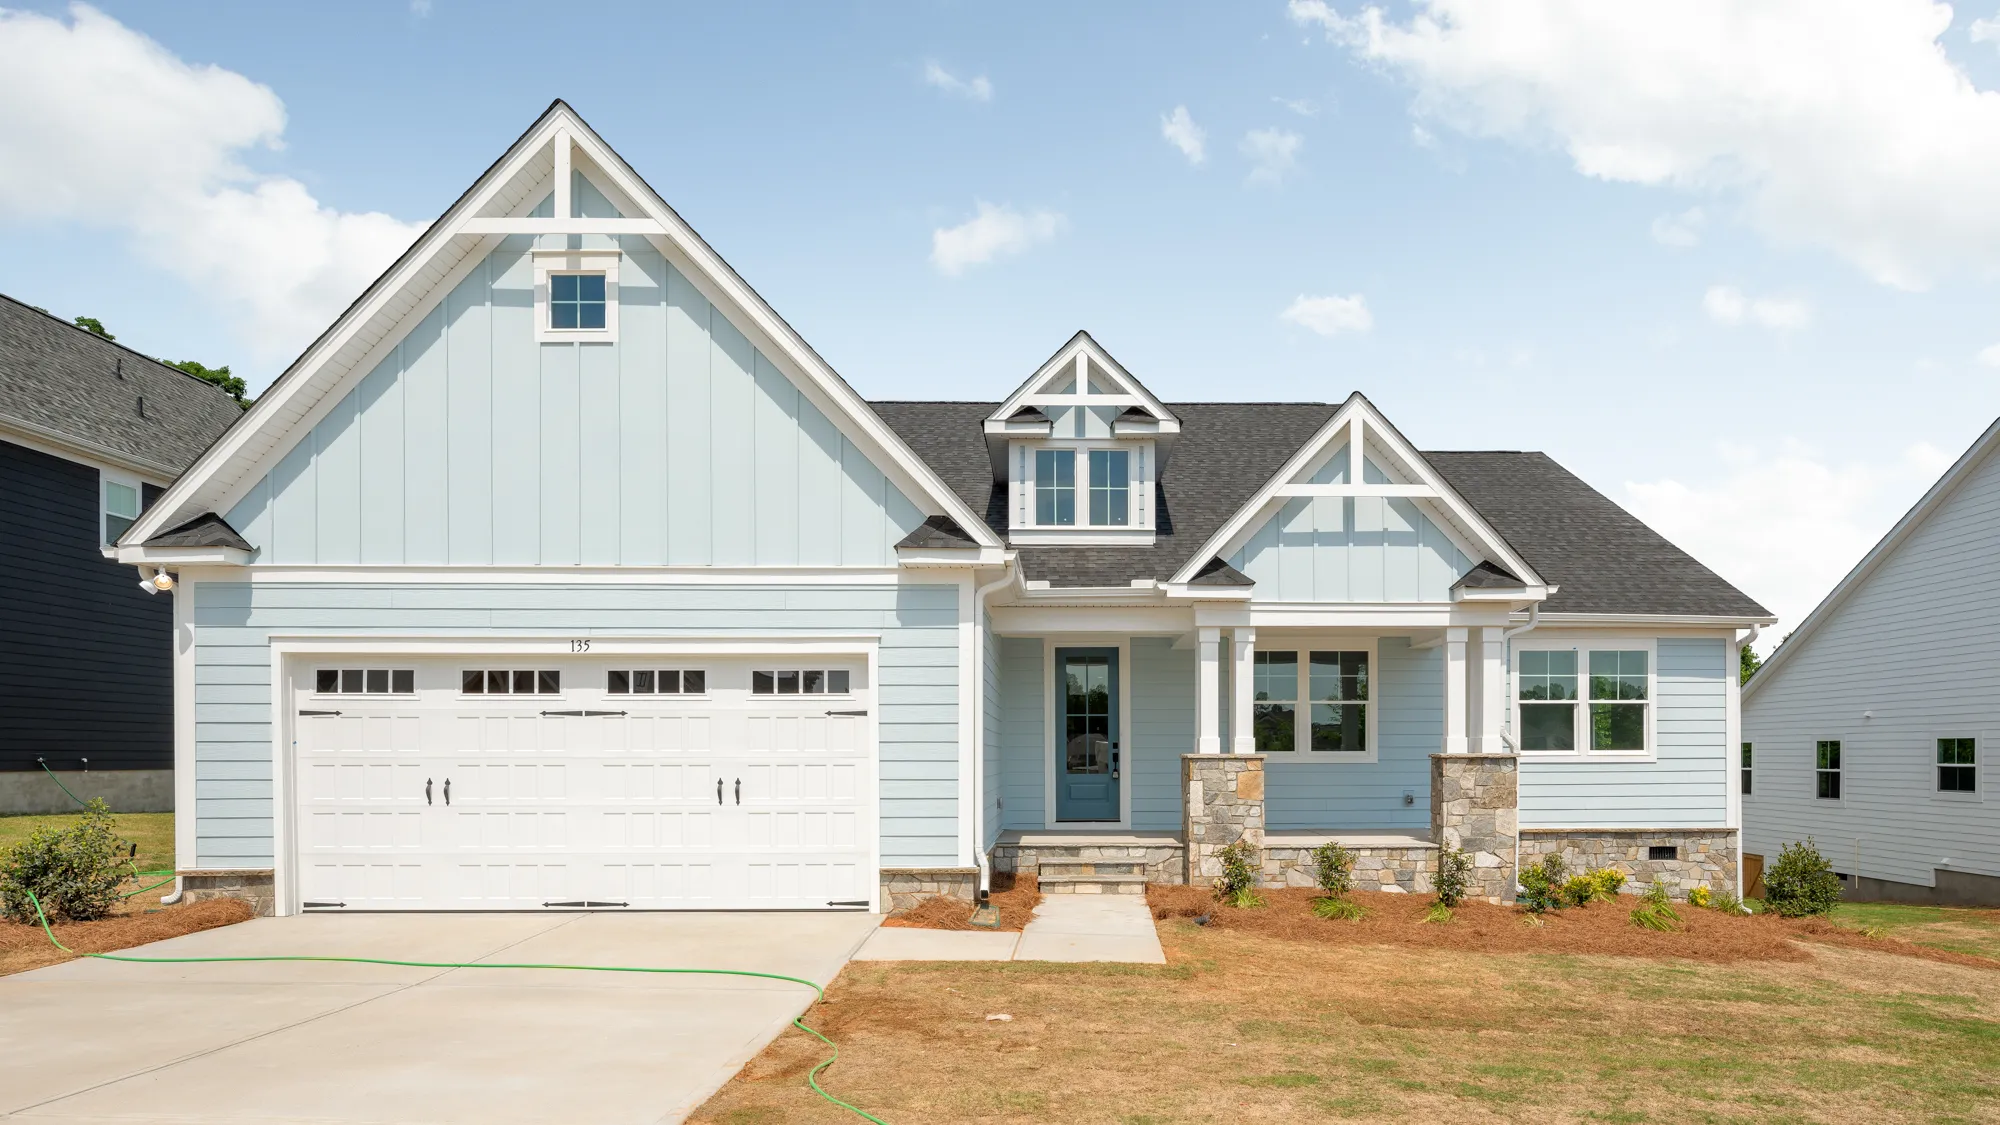 exterior of a new home in the juniper grove community by enchanted homes